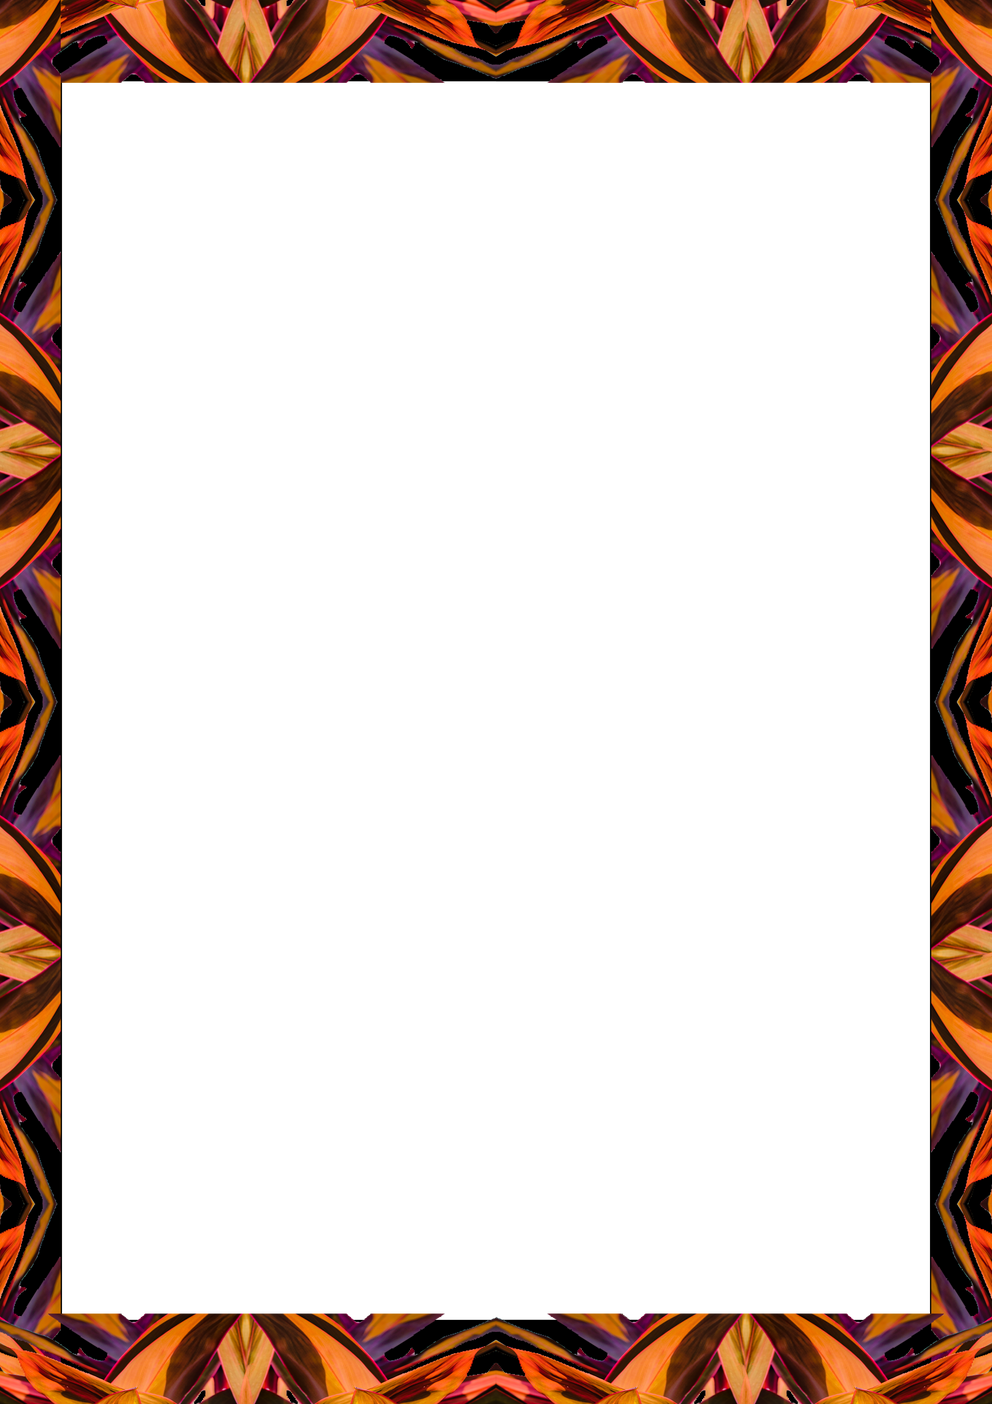 White Frame with Decorated Tribal Borders